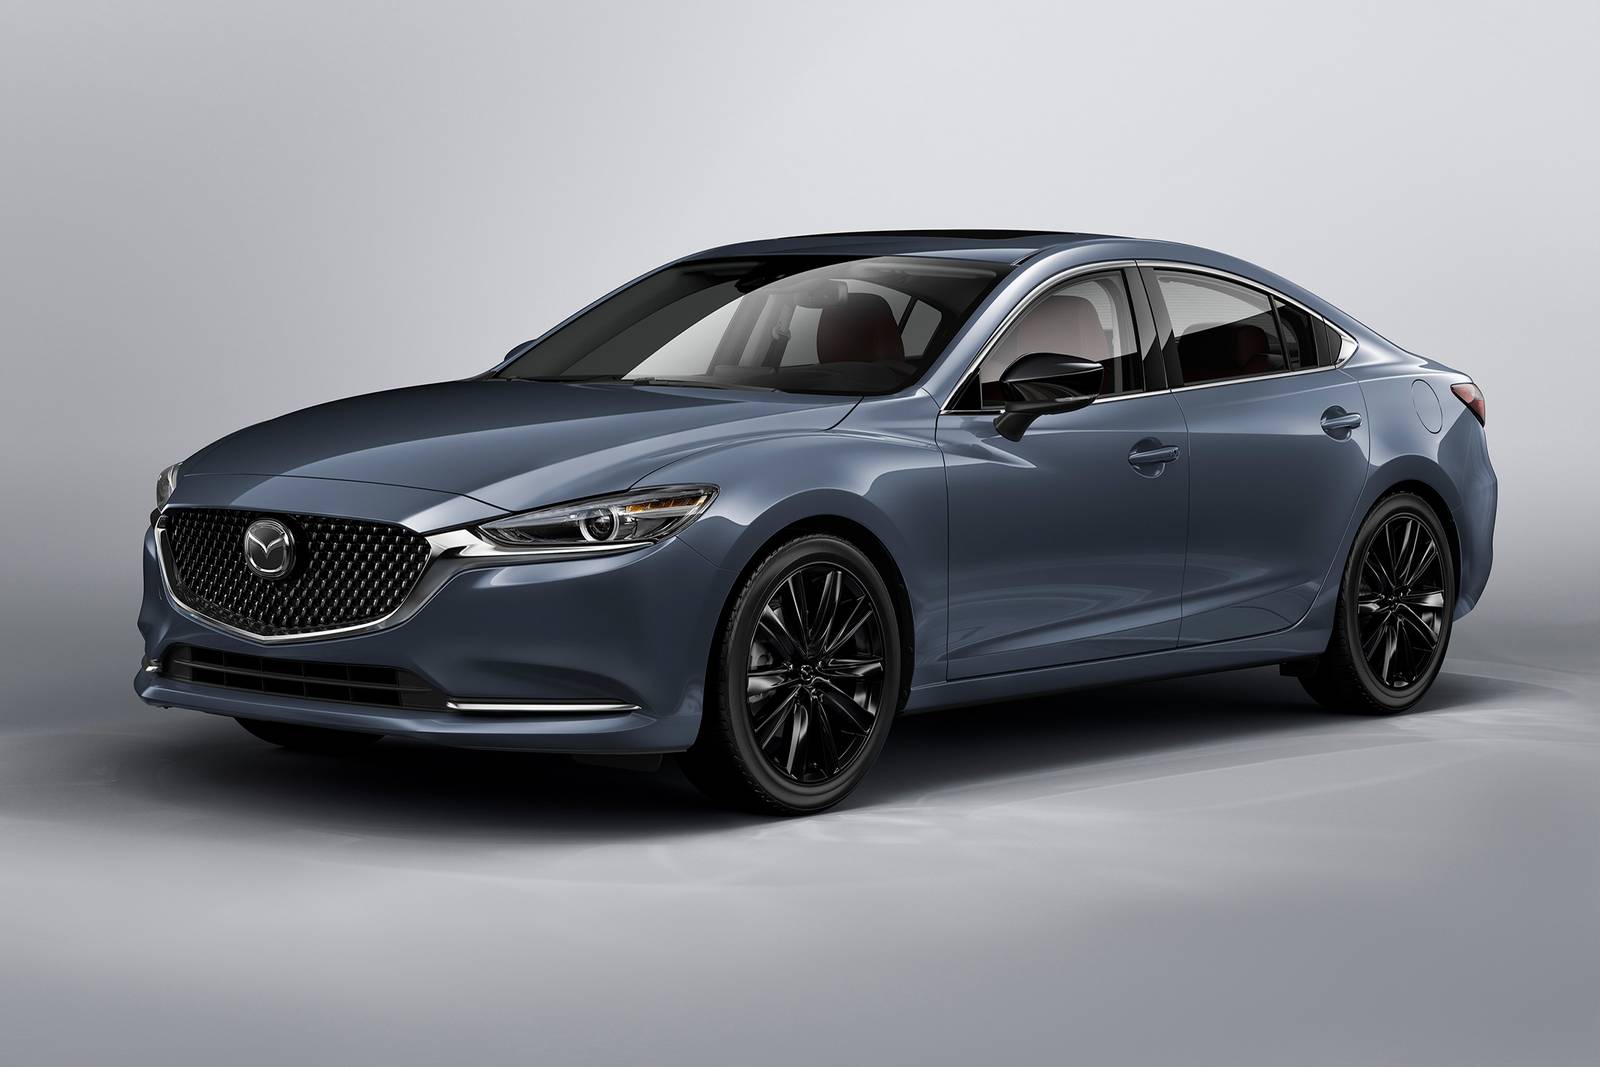 2021 Mazda 6 Prices, Reviews, and Pictures | Edmunds